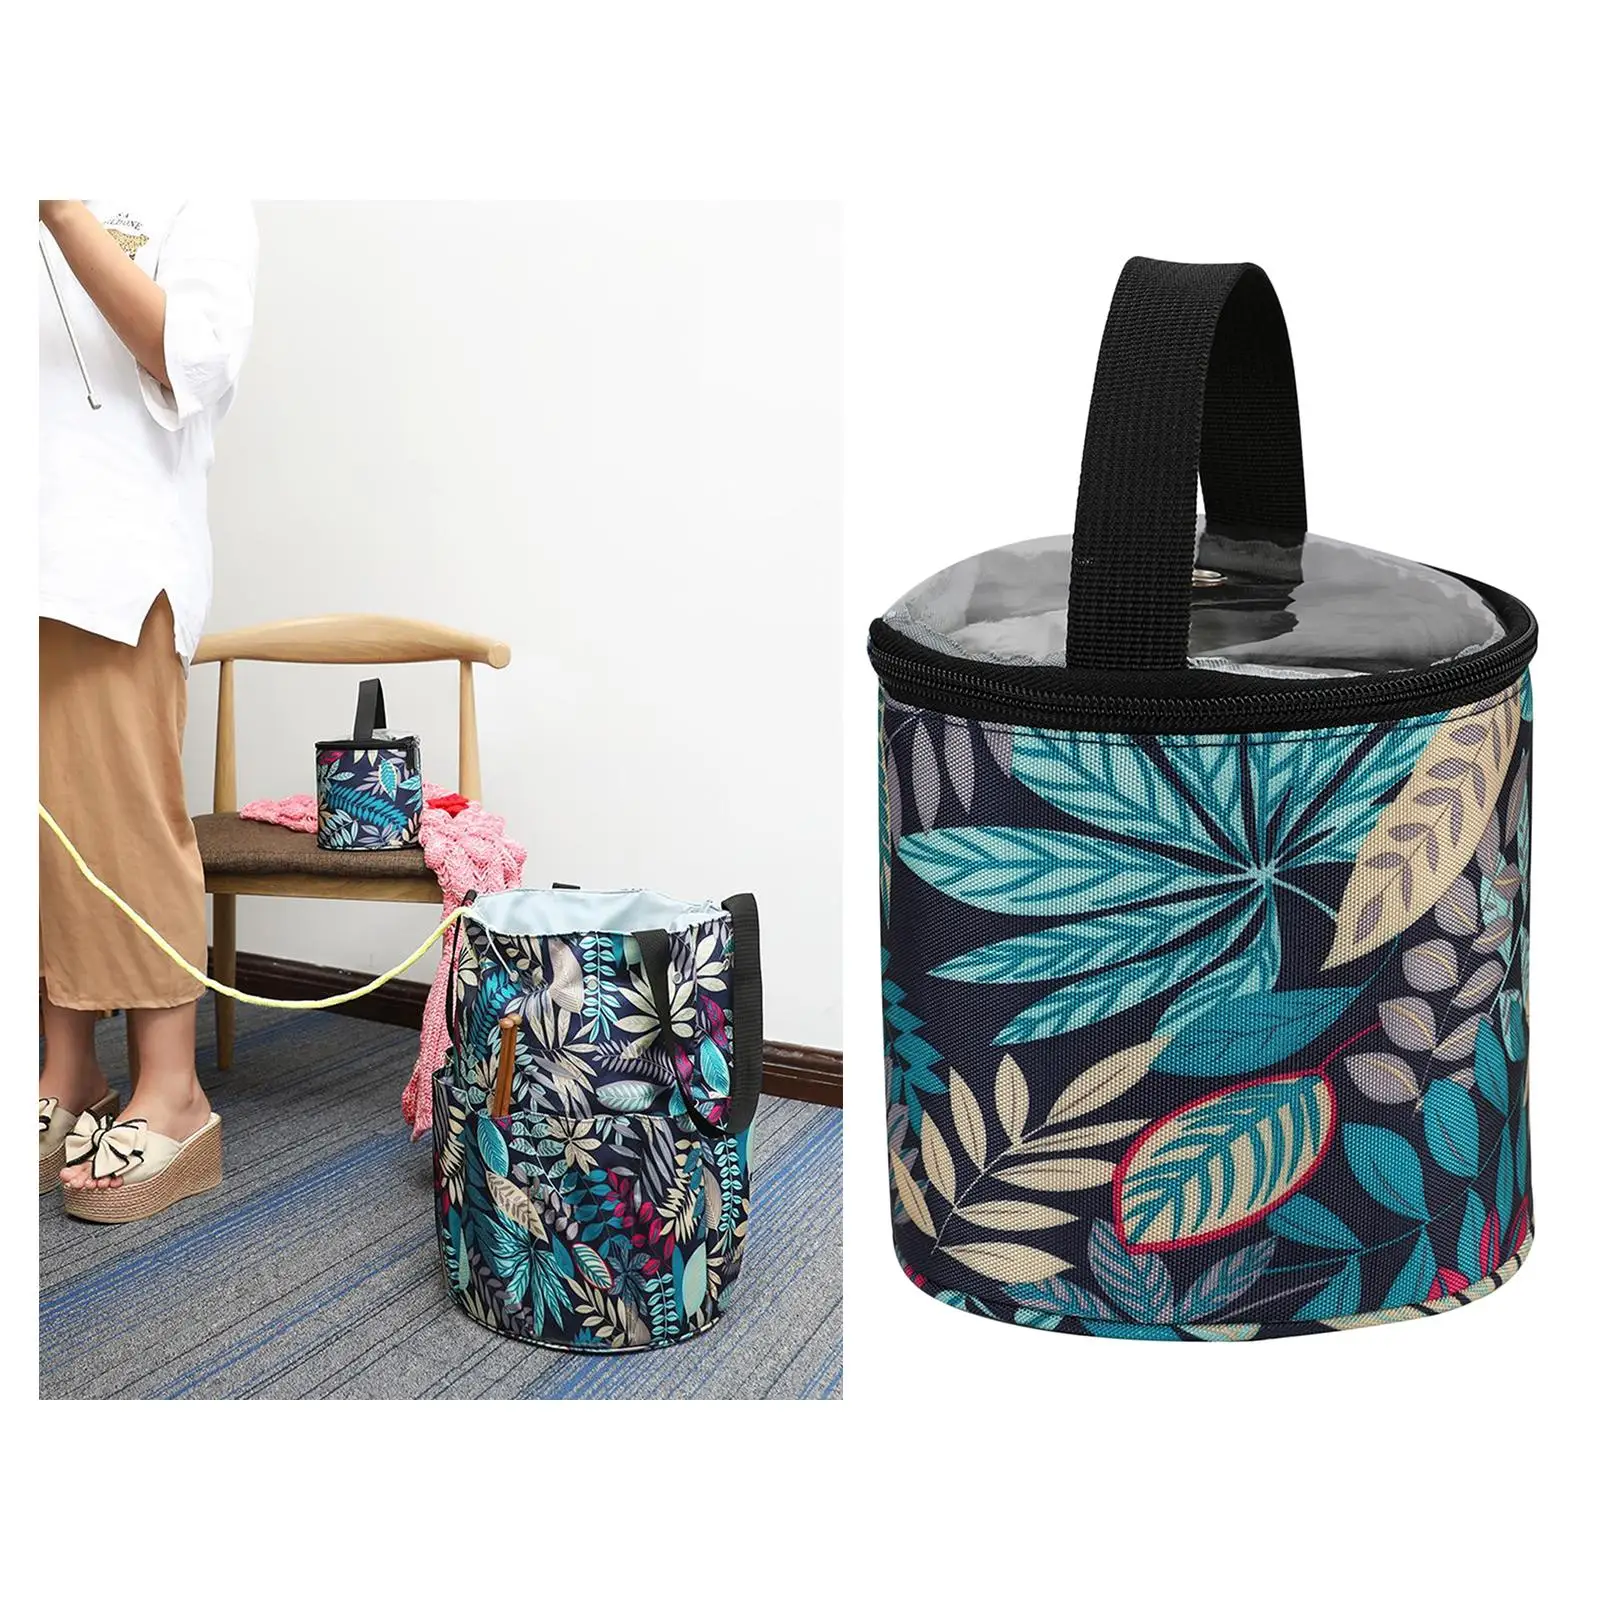 Yarn Storage  to Carry Portable Knitting Bag for Skeins, Crochet Hooks